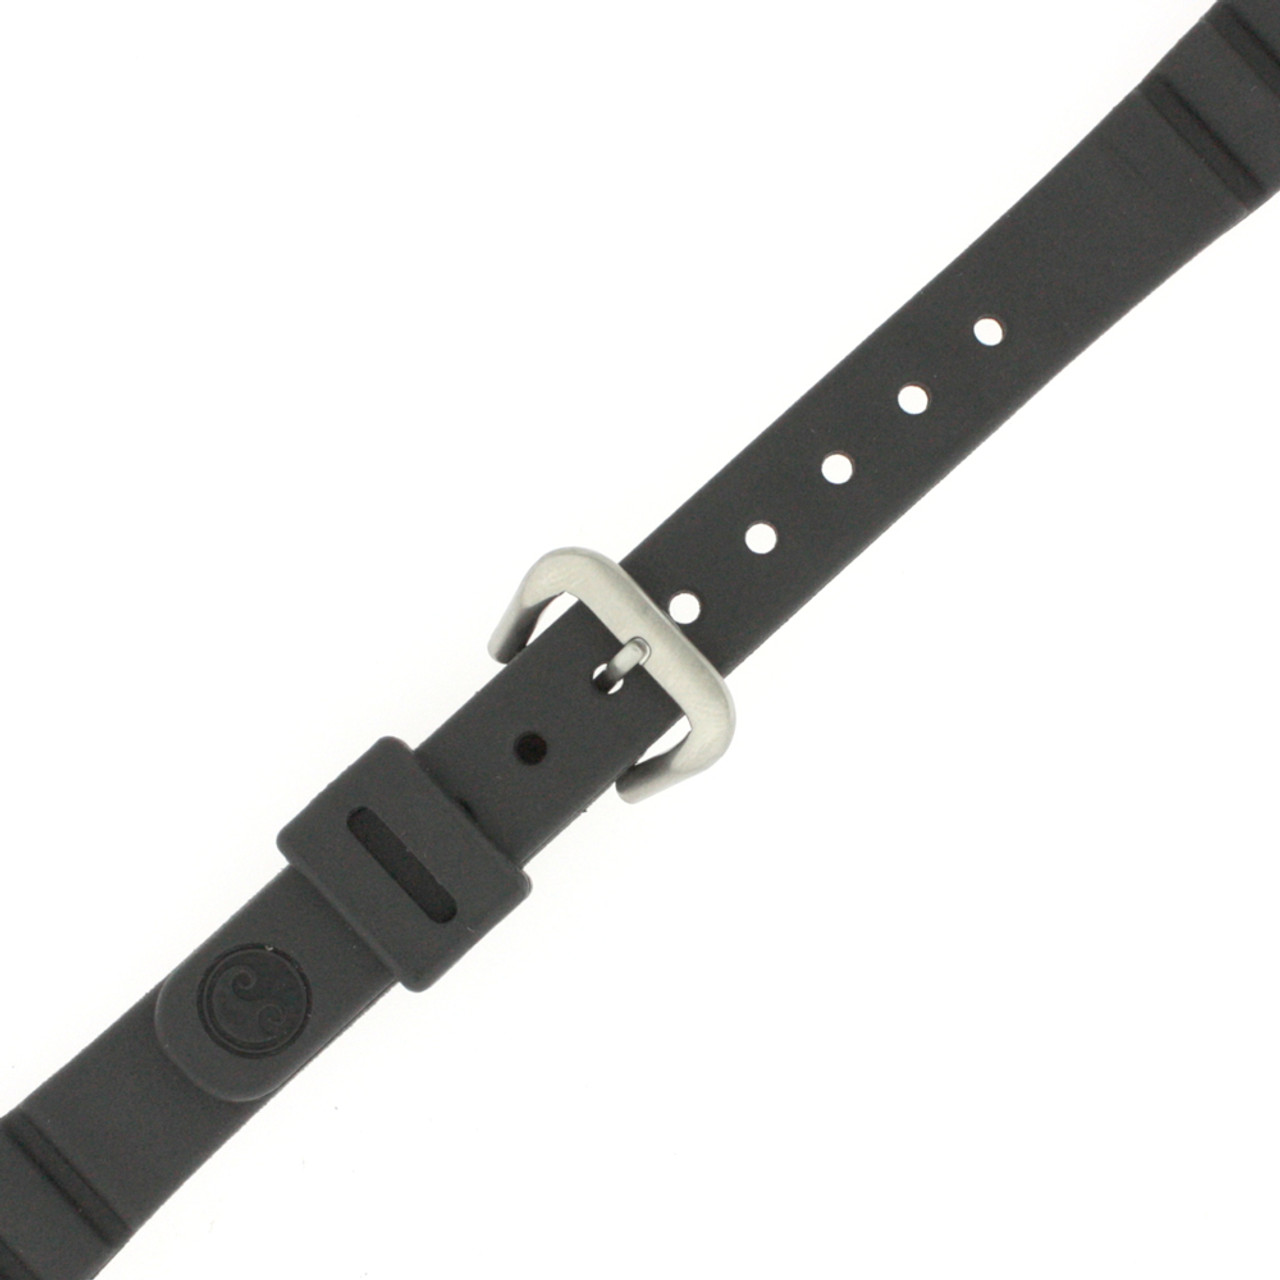 Seiko Rubber Divers Watch band 13mm 2205-0790